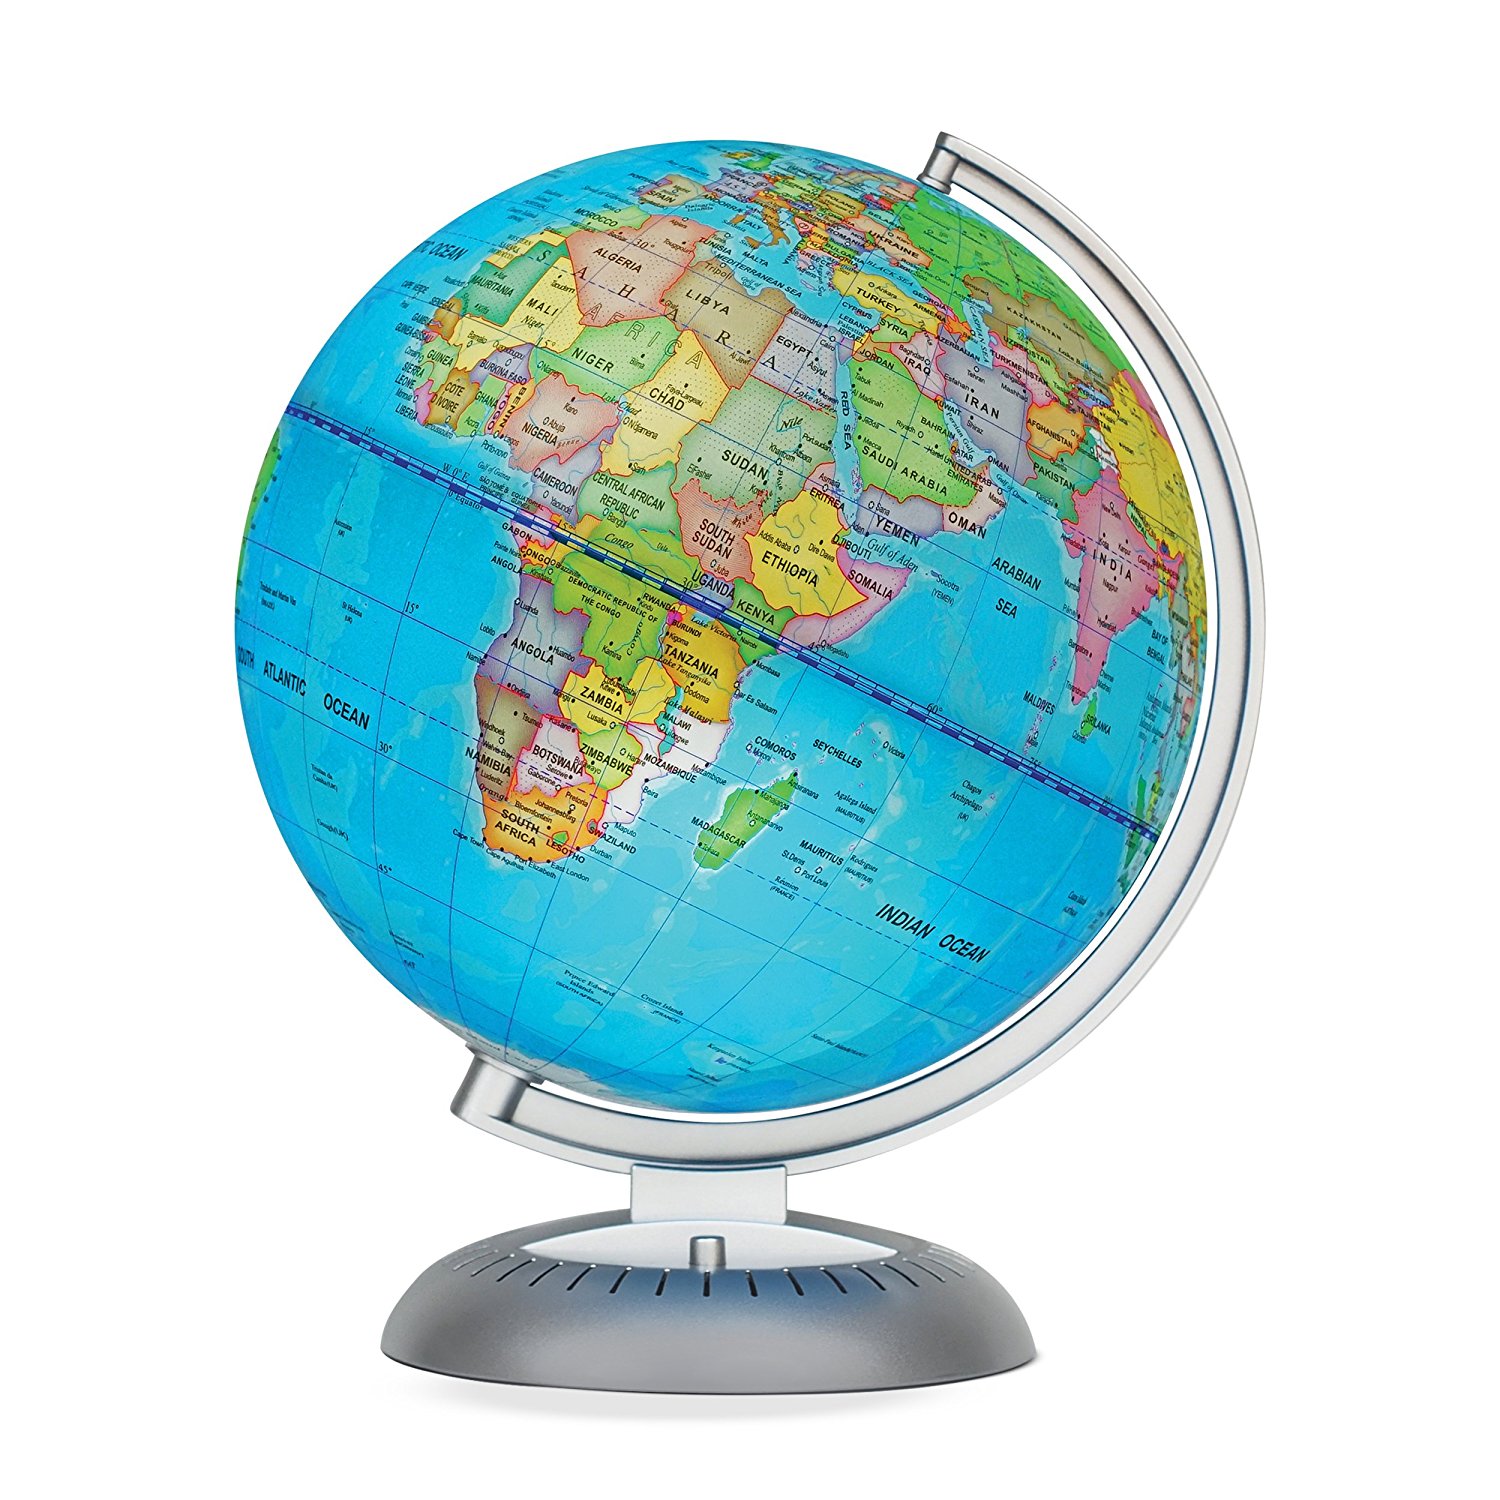 Amazon.com: Illuminated World Globe for Kids With Stand,Built in LED ...